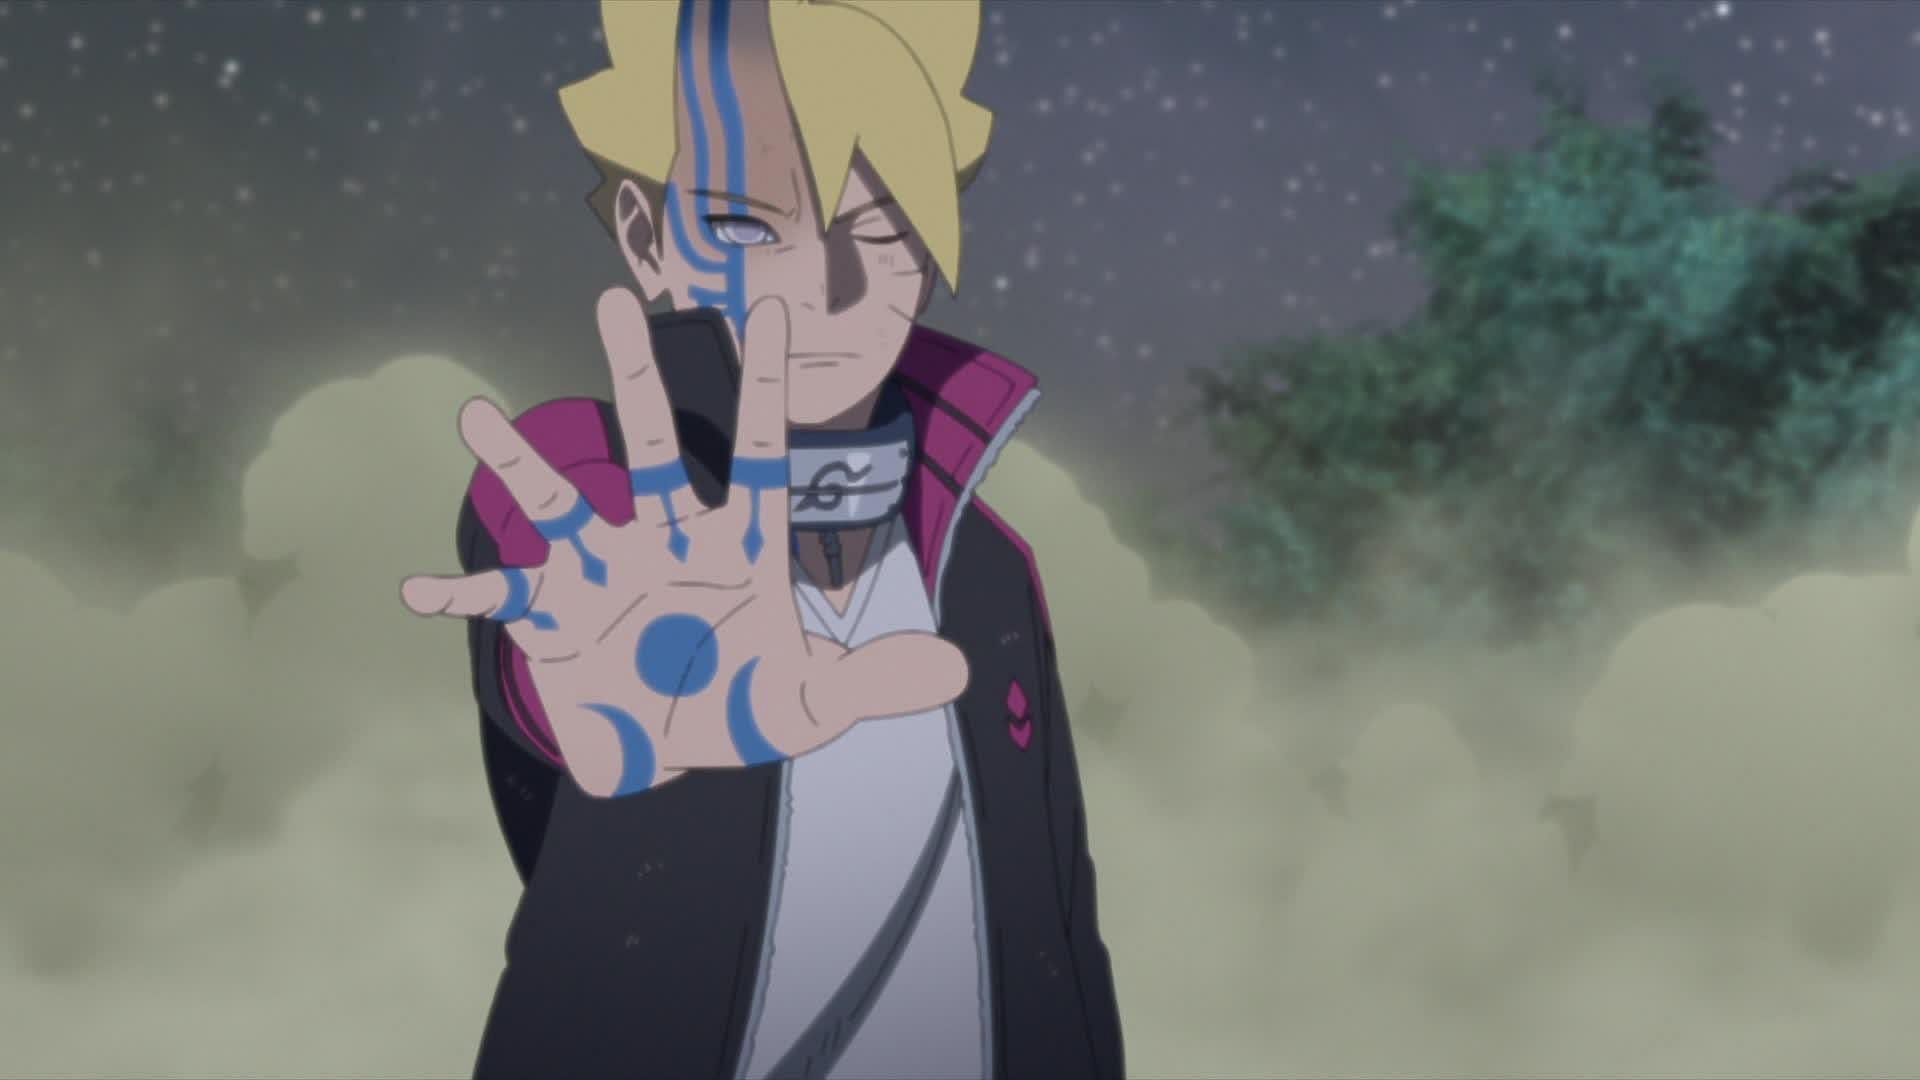 What was your favorite part of ep 292? Were you satisfied with the way the  Anime handled your favorite part?Mine was: : r/Boruto